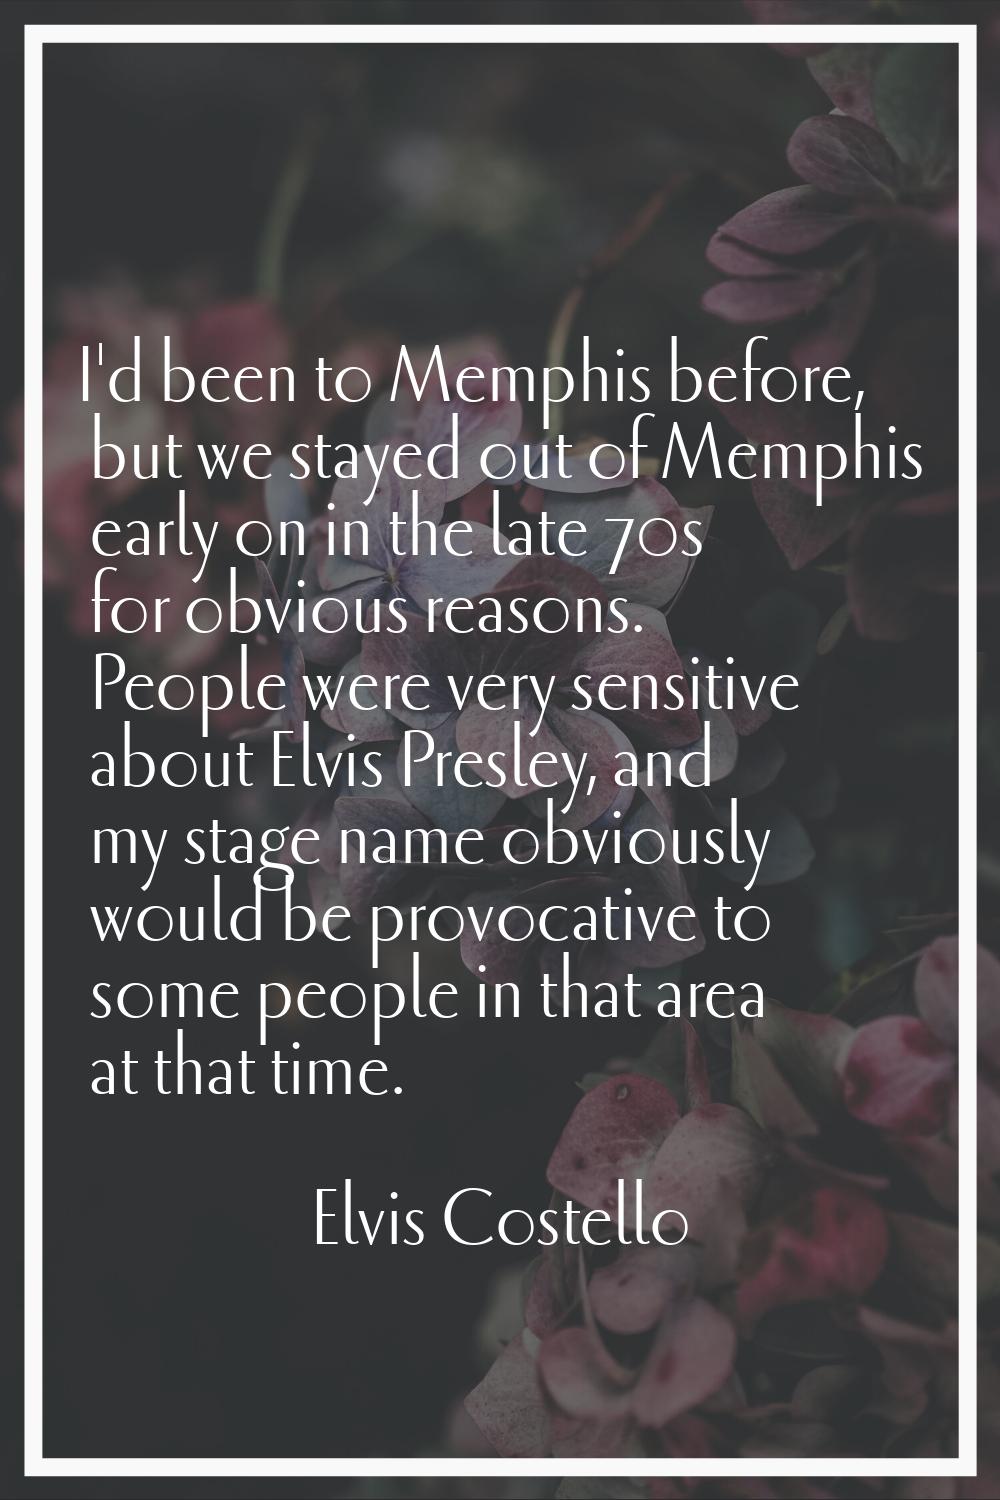 I'd been to Memphis before, but we stayed out of Memphis early on in the late 70s for obvious reaso